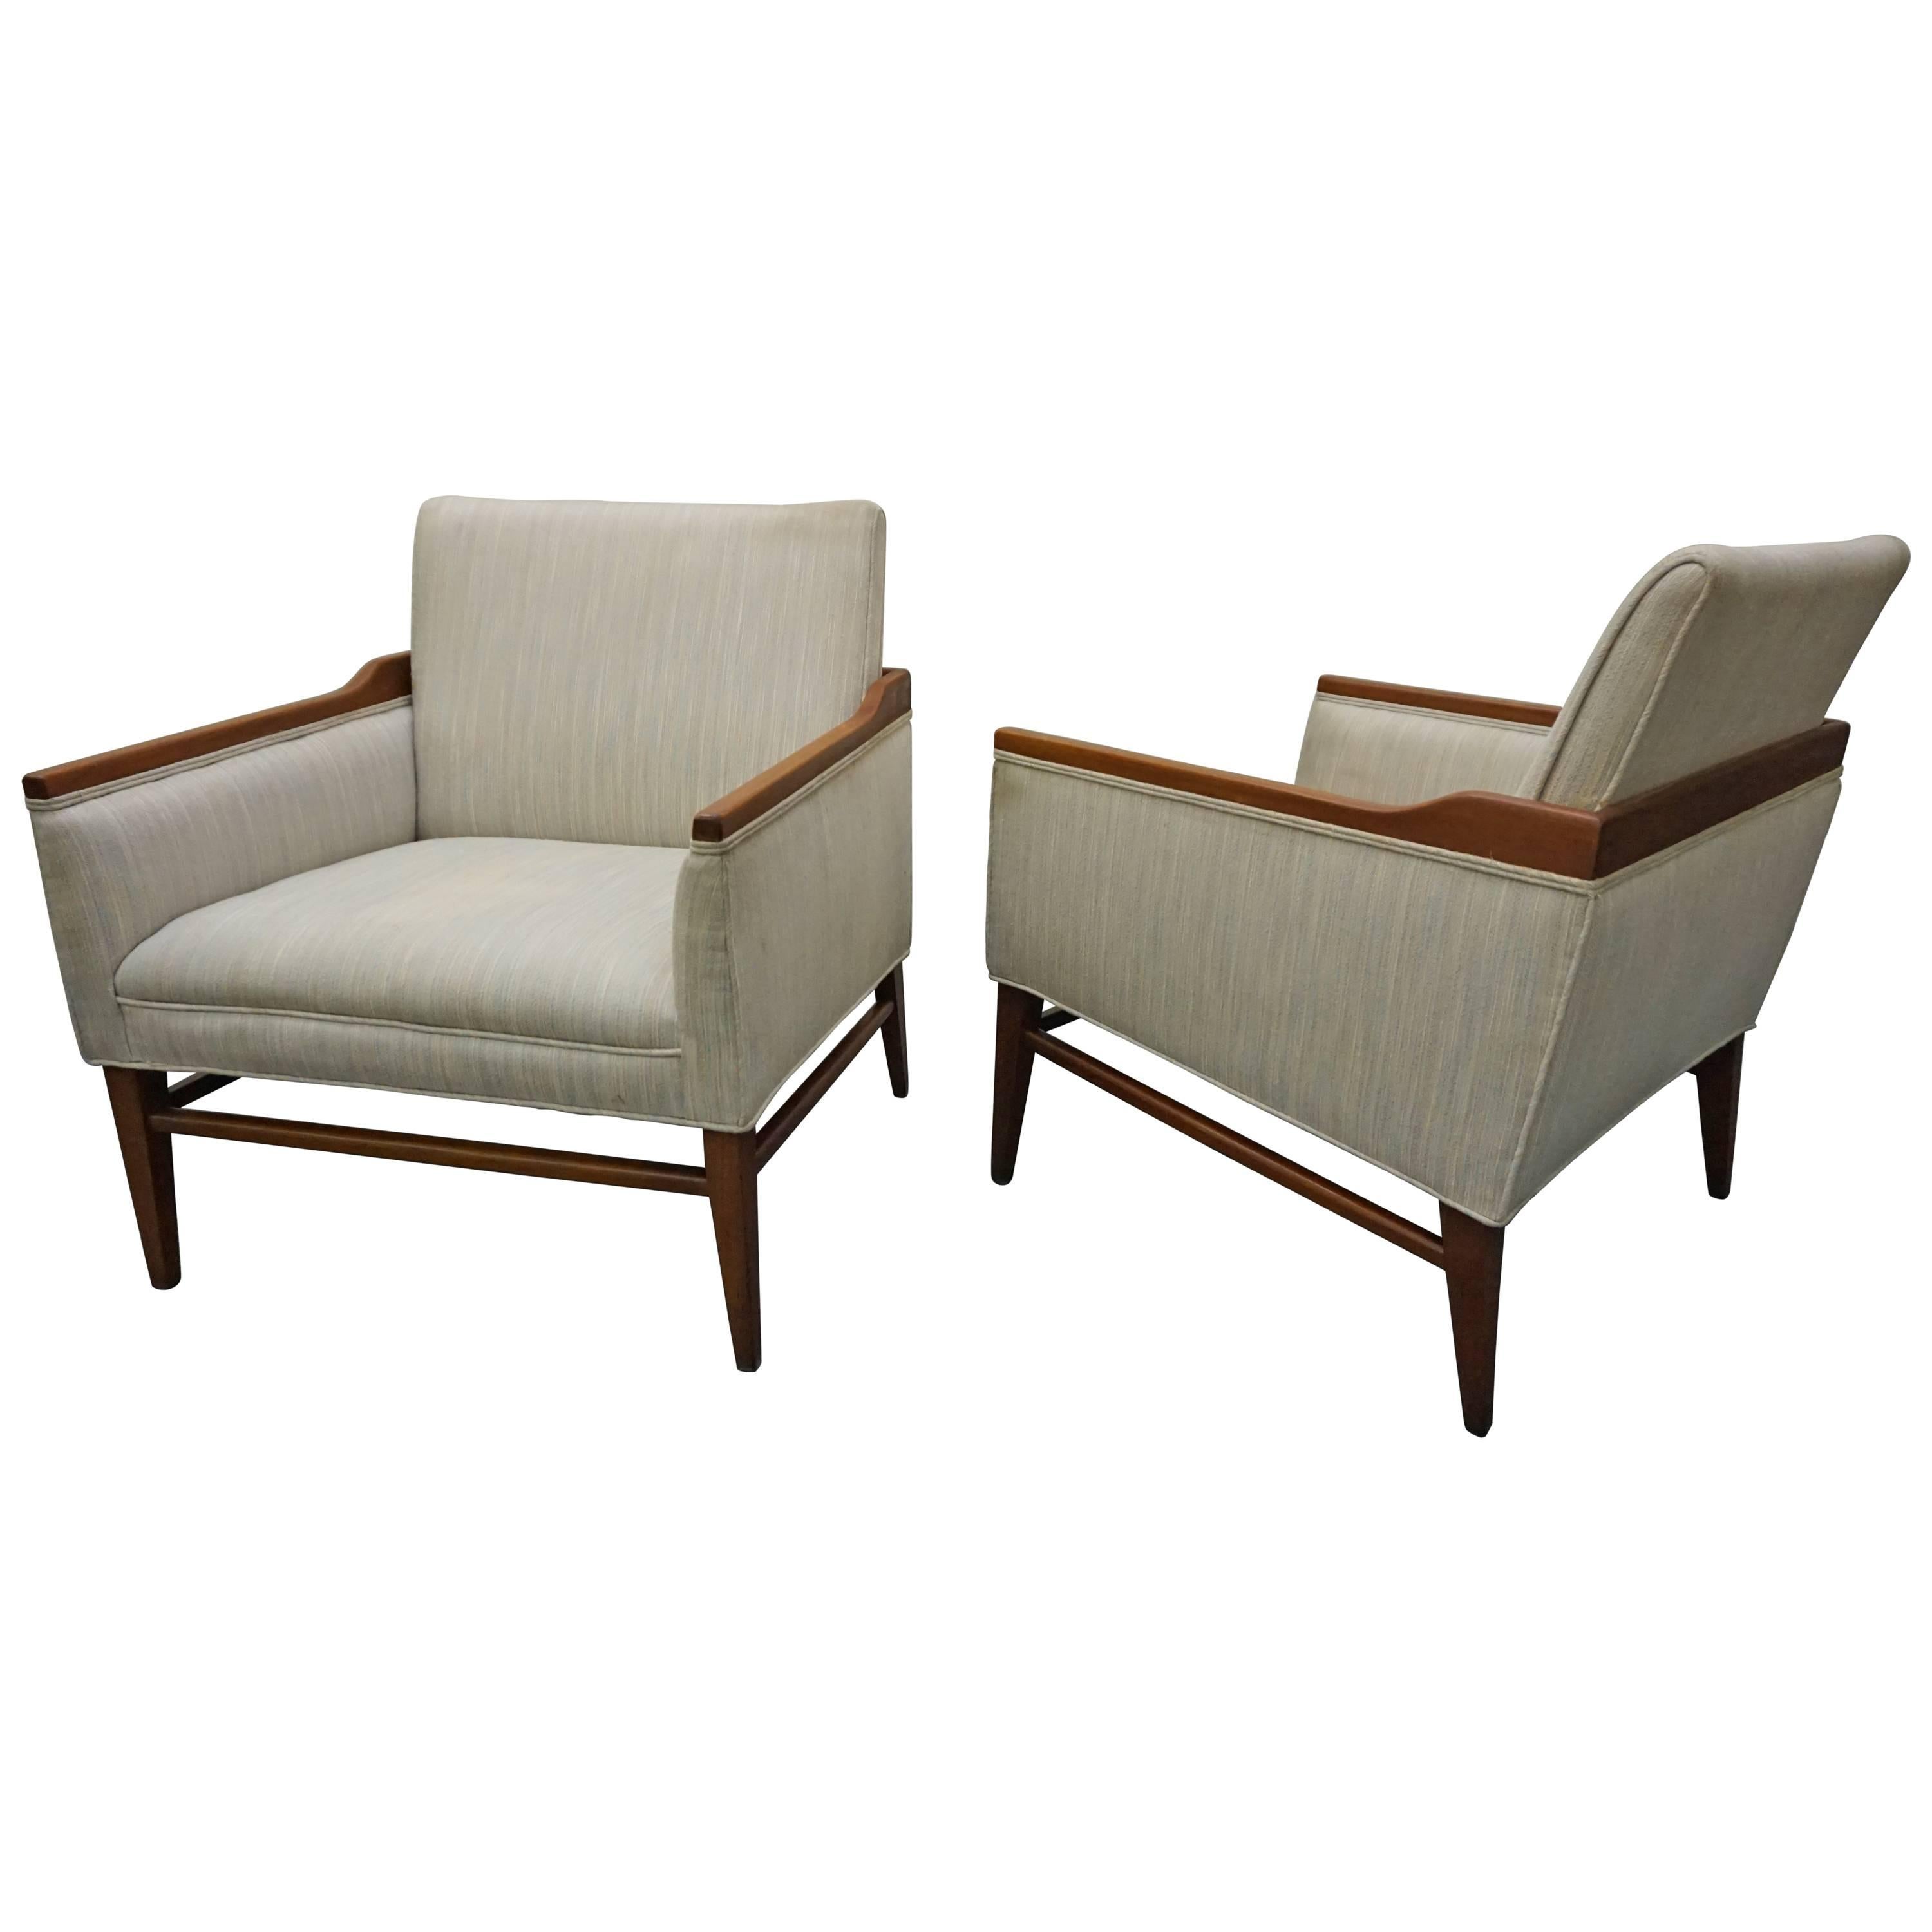 Stunning Pair of American Mid-Century Modern Walnut Lounge Chairs For Sale